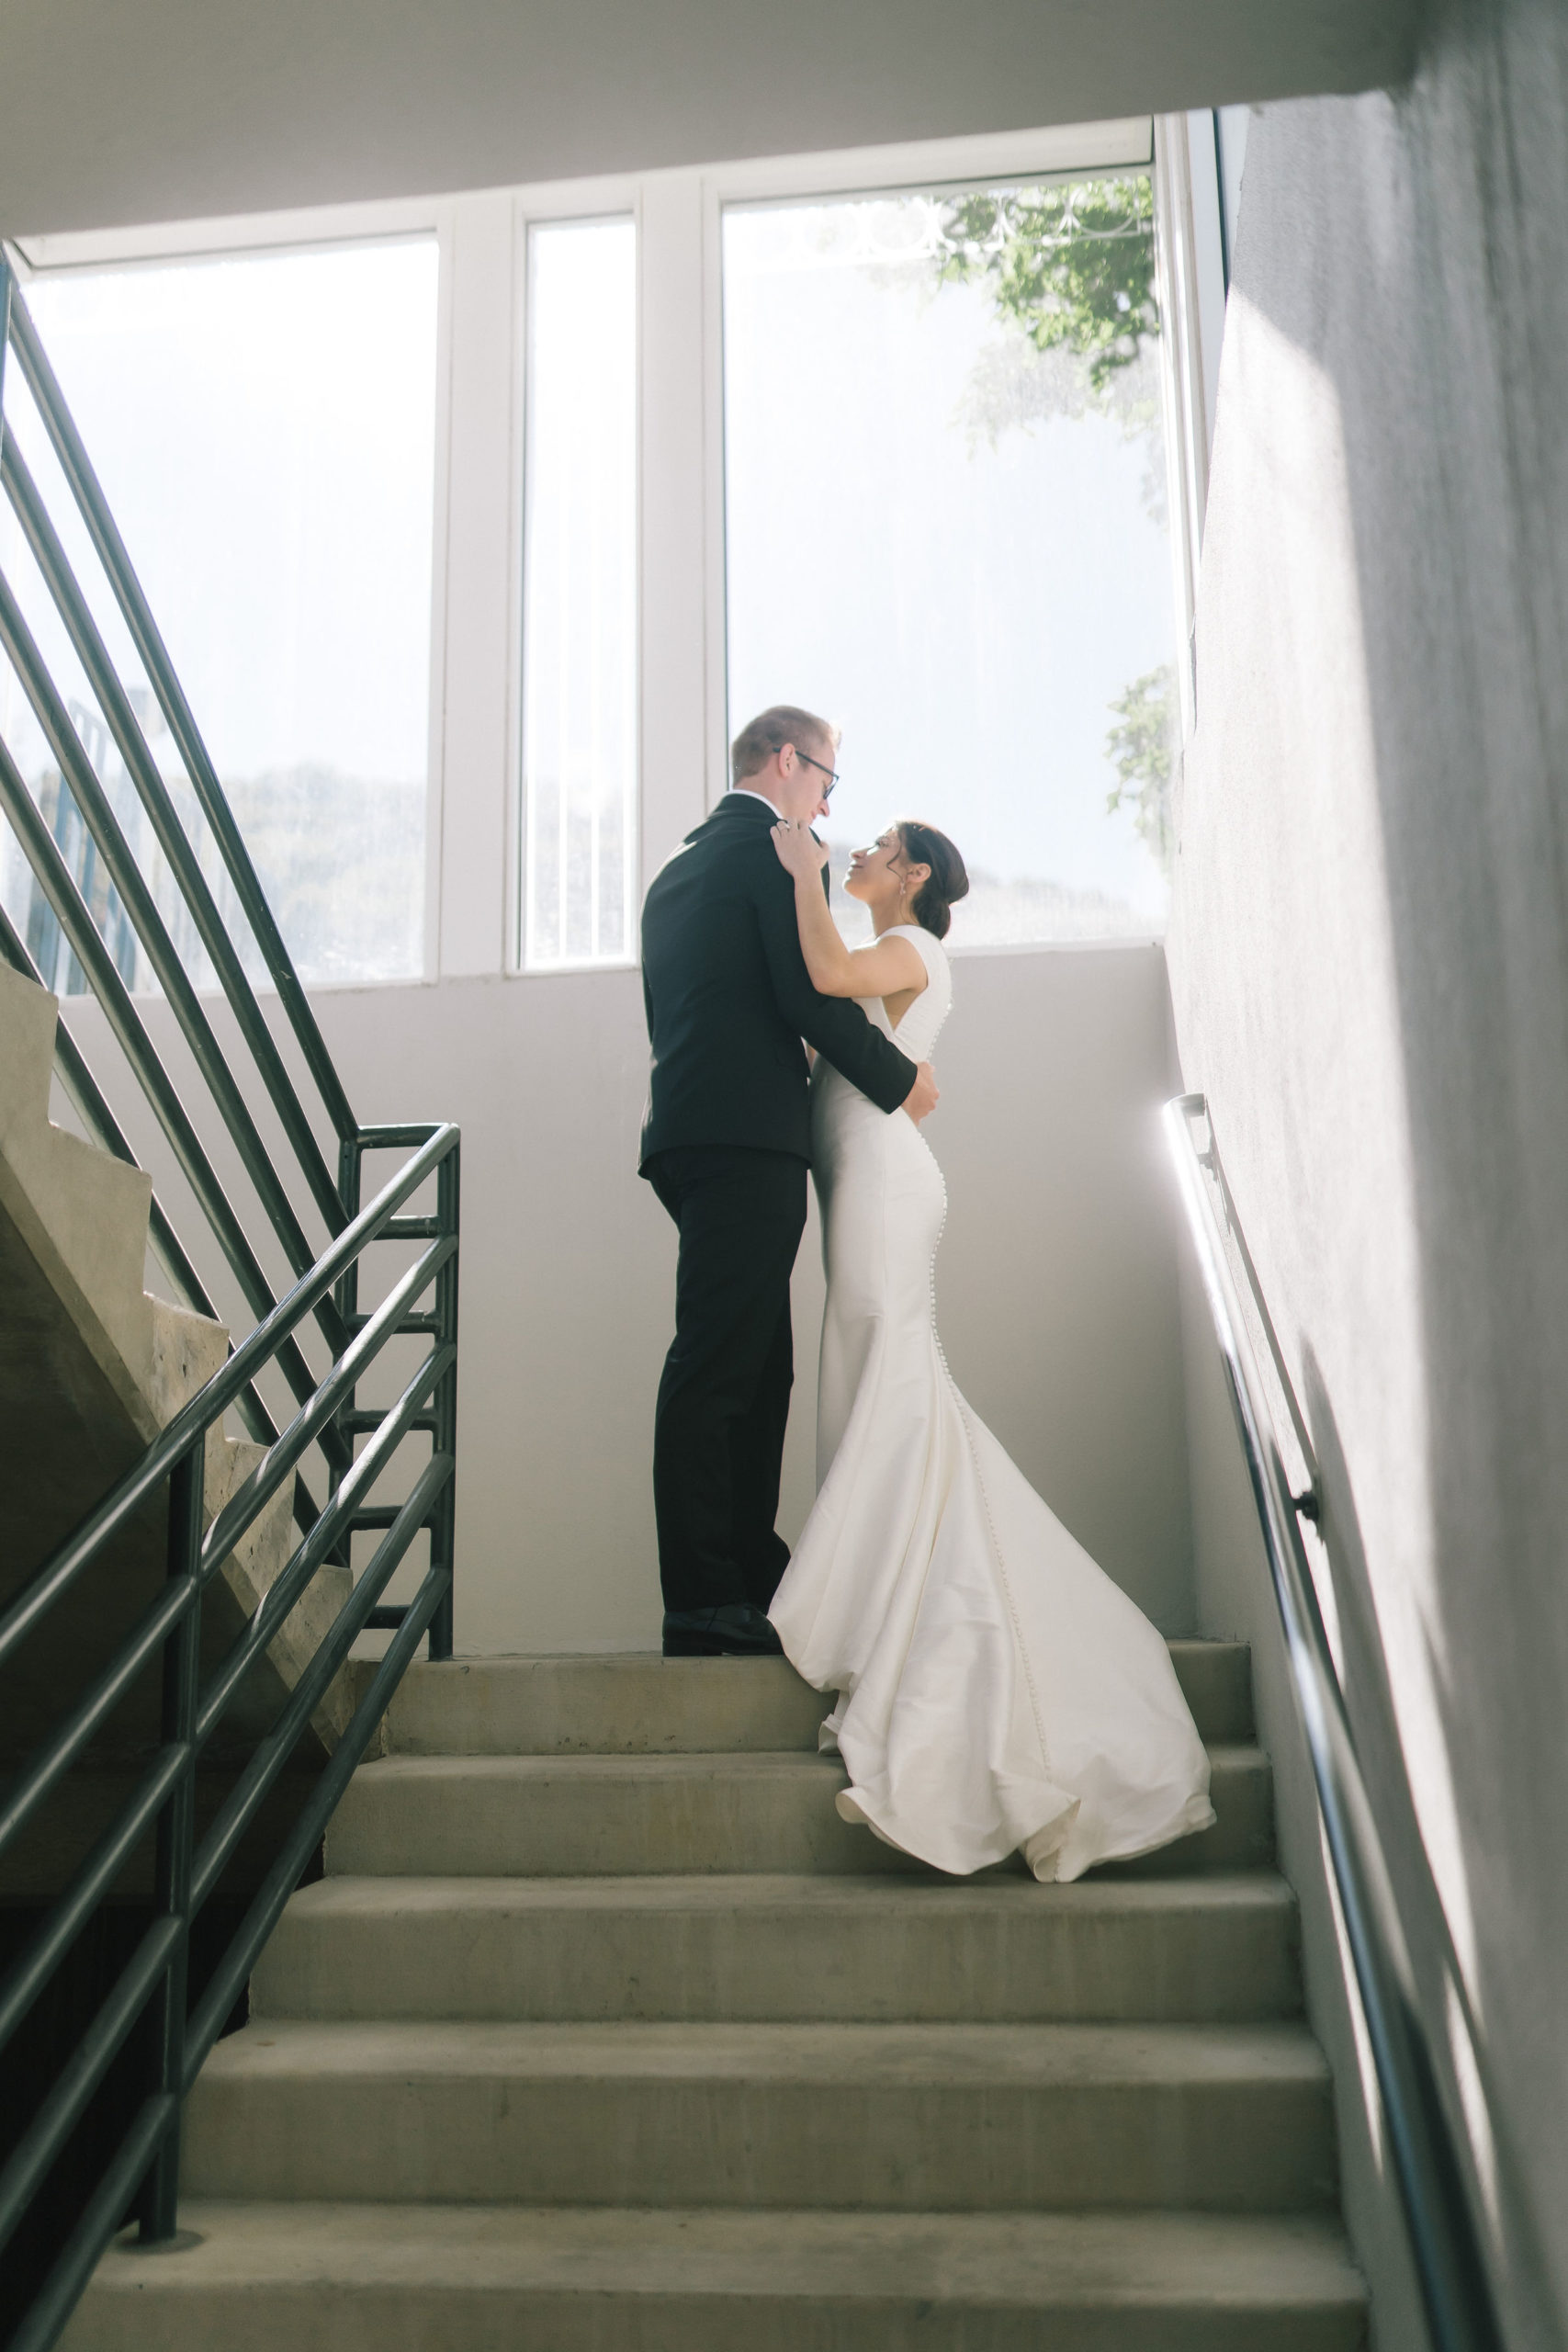 Amalfi Coast Themed Wedding Italian bride and groom standing in a stairwell on their wedding day and holding each other with a large bright window above them shining in the daylight